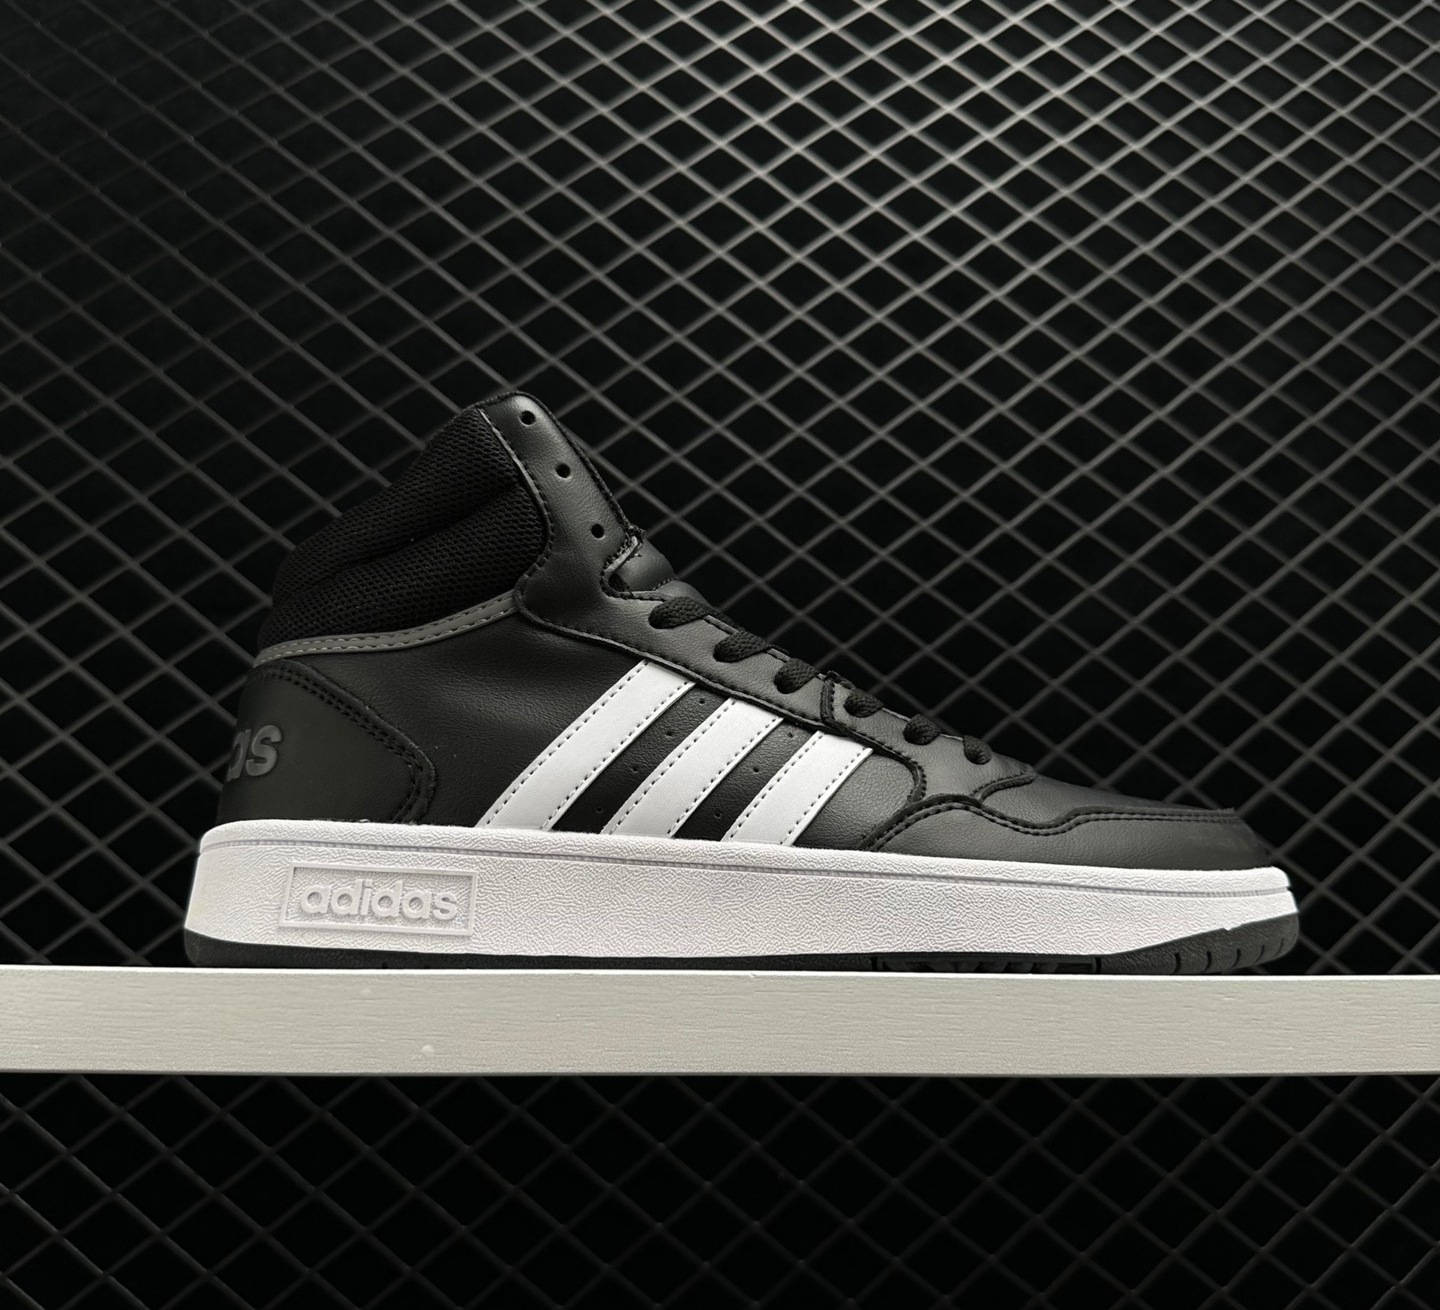 Adidas Hoops 3.0 Mid Vintage Shoes 'Core Black' GW3020 - Classic Style for Retro Sneaker Lovers